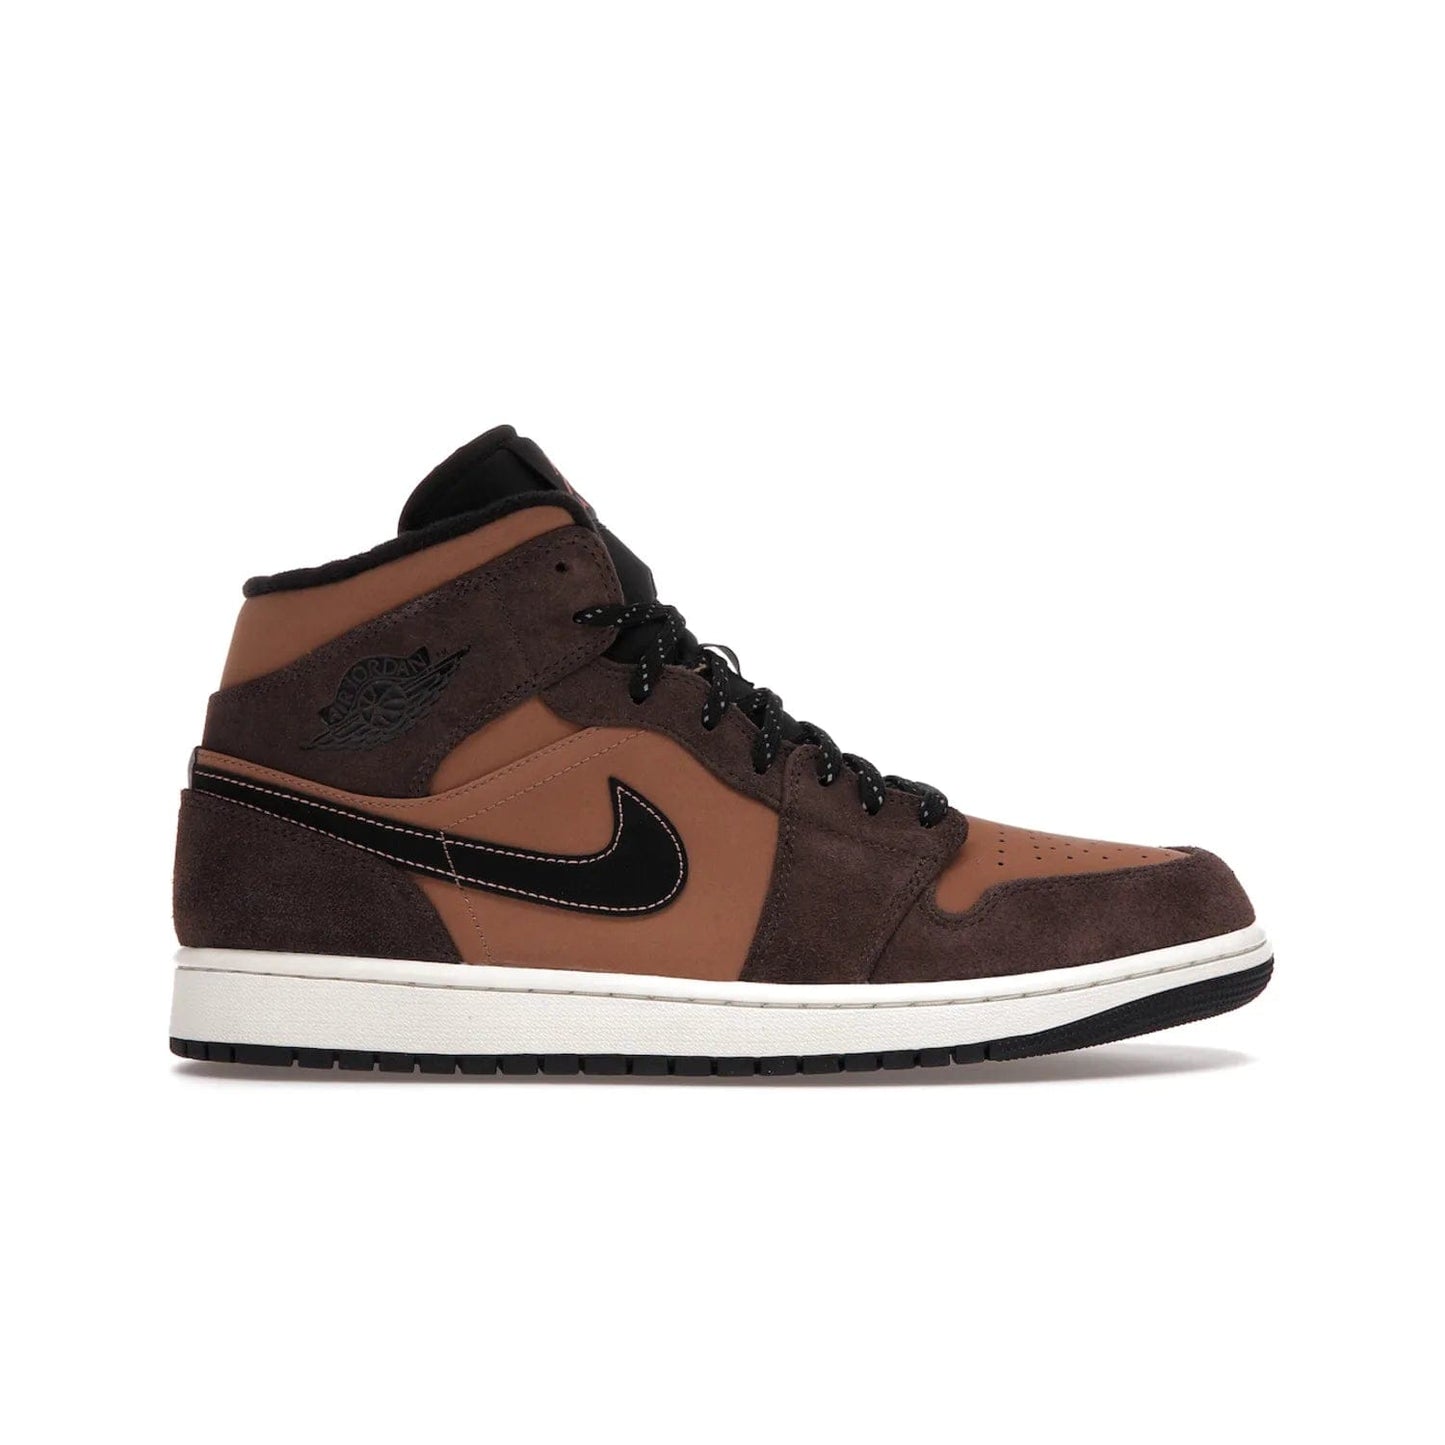 Jordan 1 Mid SE Dark Chocolate - Image 1 - Only at www.BallersClubKickz.com - This fashionable and functional Jordan 1 Mid SE Dark Chocolate features a light brown Durabuck upper, dark brown suede overlays, black Swoosh logos and reflective patch at heel. A must-have for any sneakerhead!